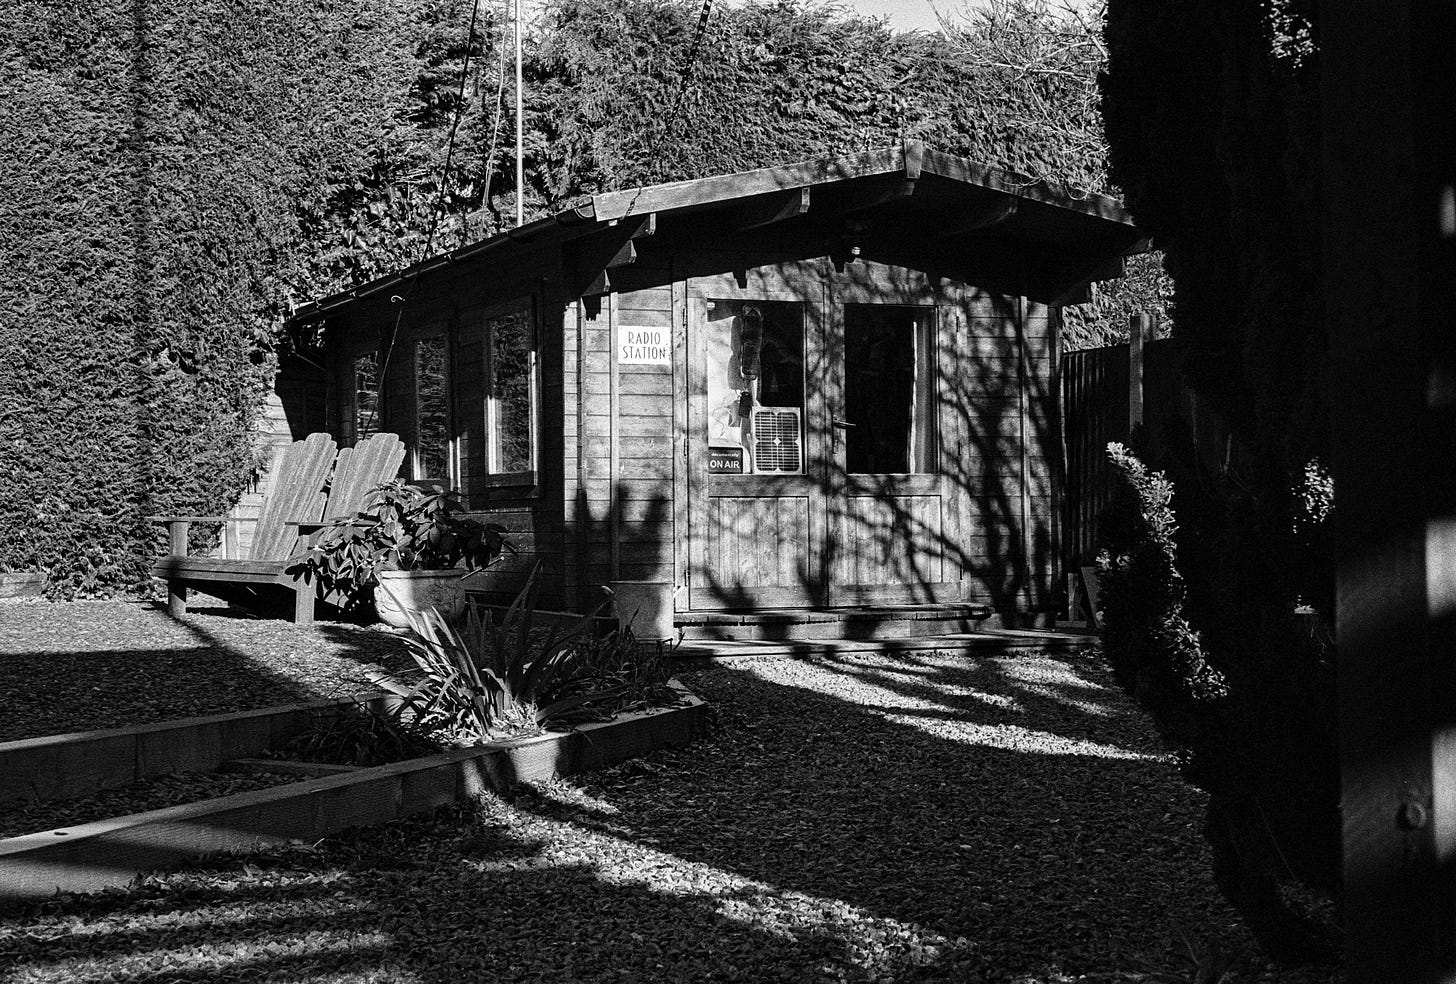 A photo of my shed taken on a Leica M7 with a 35mm lens using Ilford HP5+